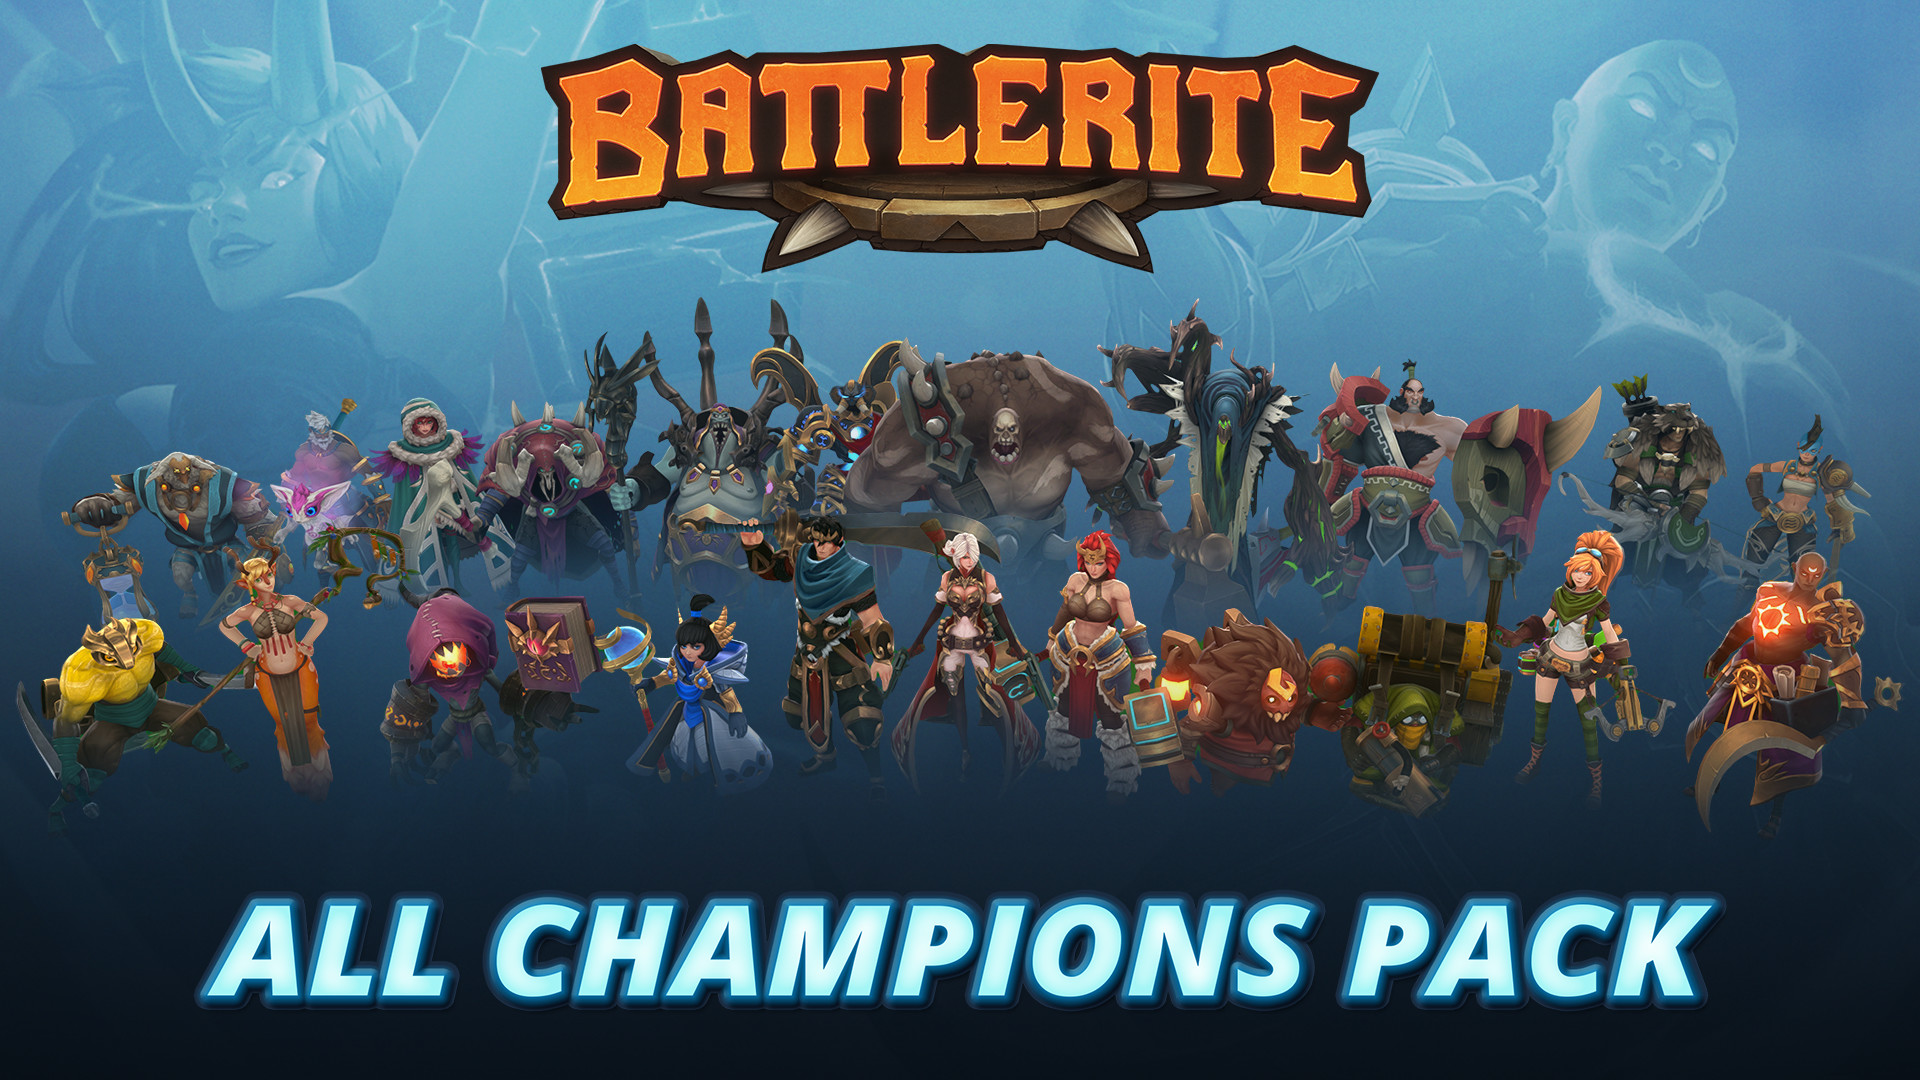 Save 20% on Battlerite - All Champions Pack on Steam